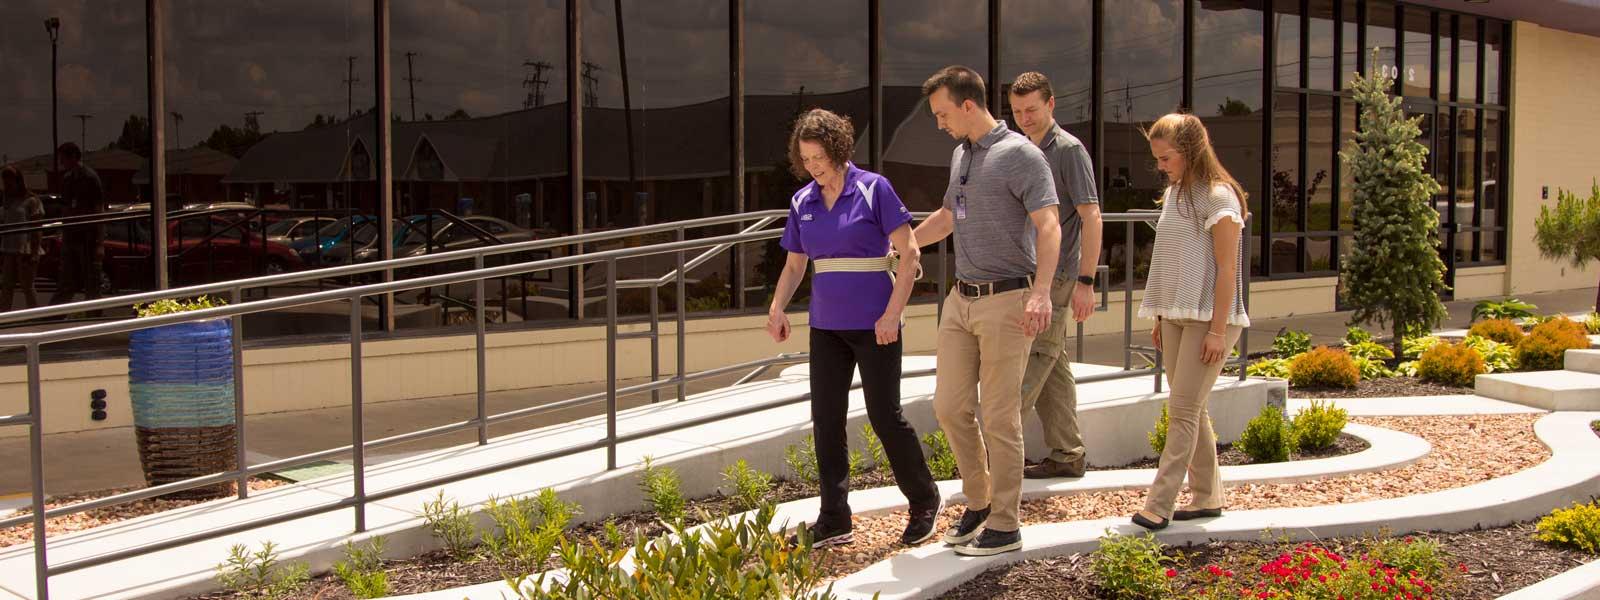 two students walk behind instructor who is helping patient walk through physical therapy garden